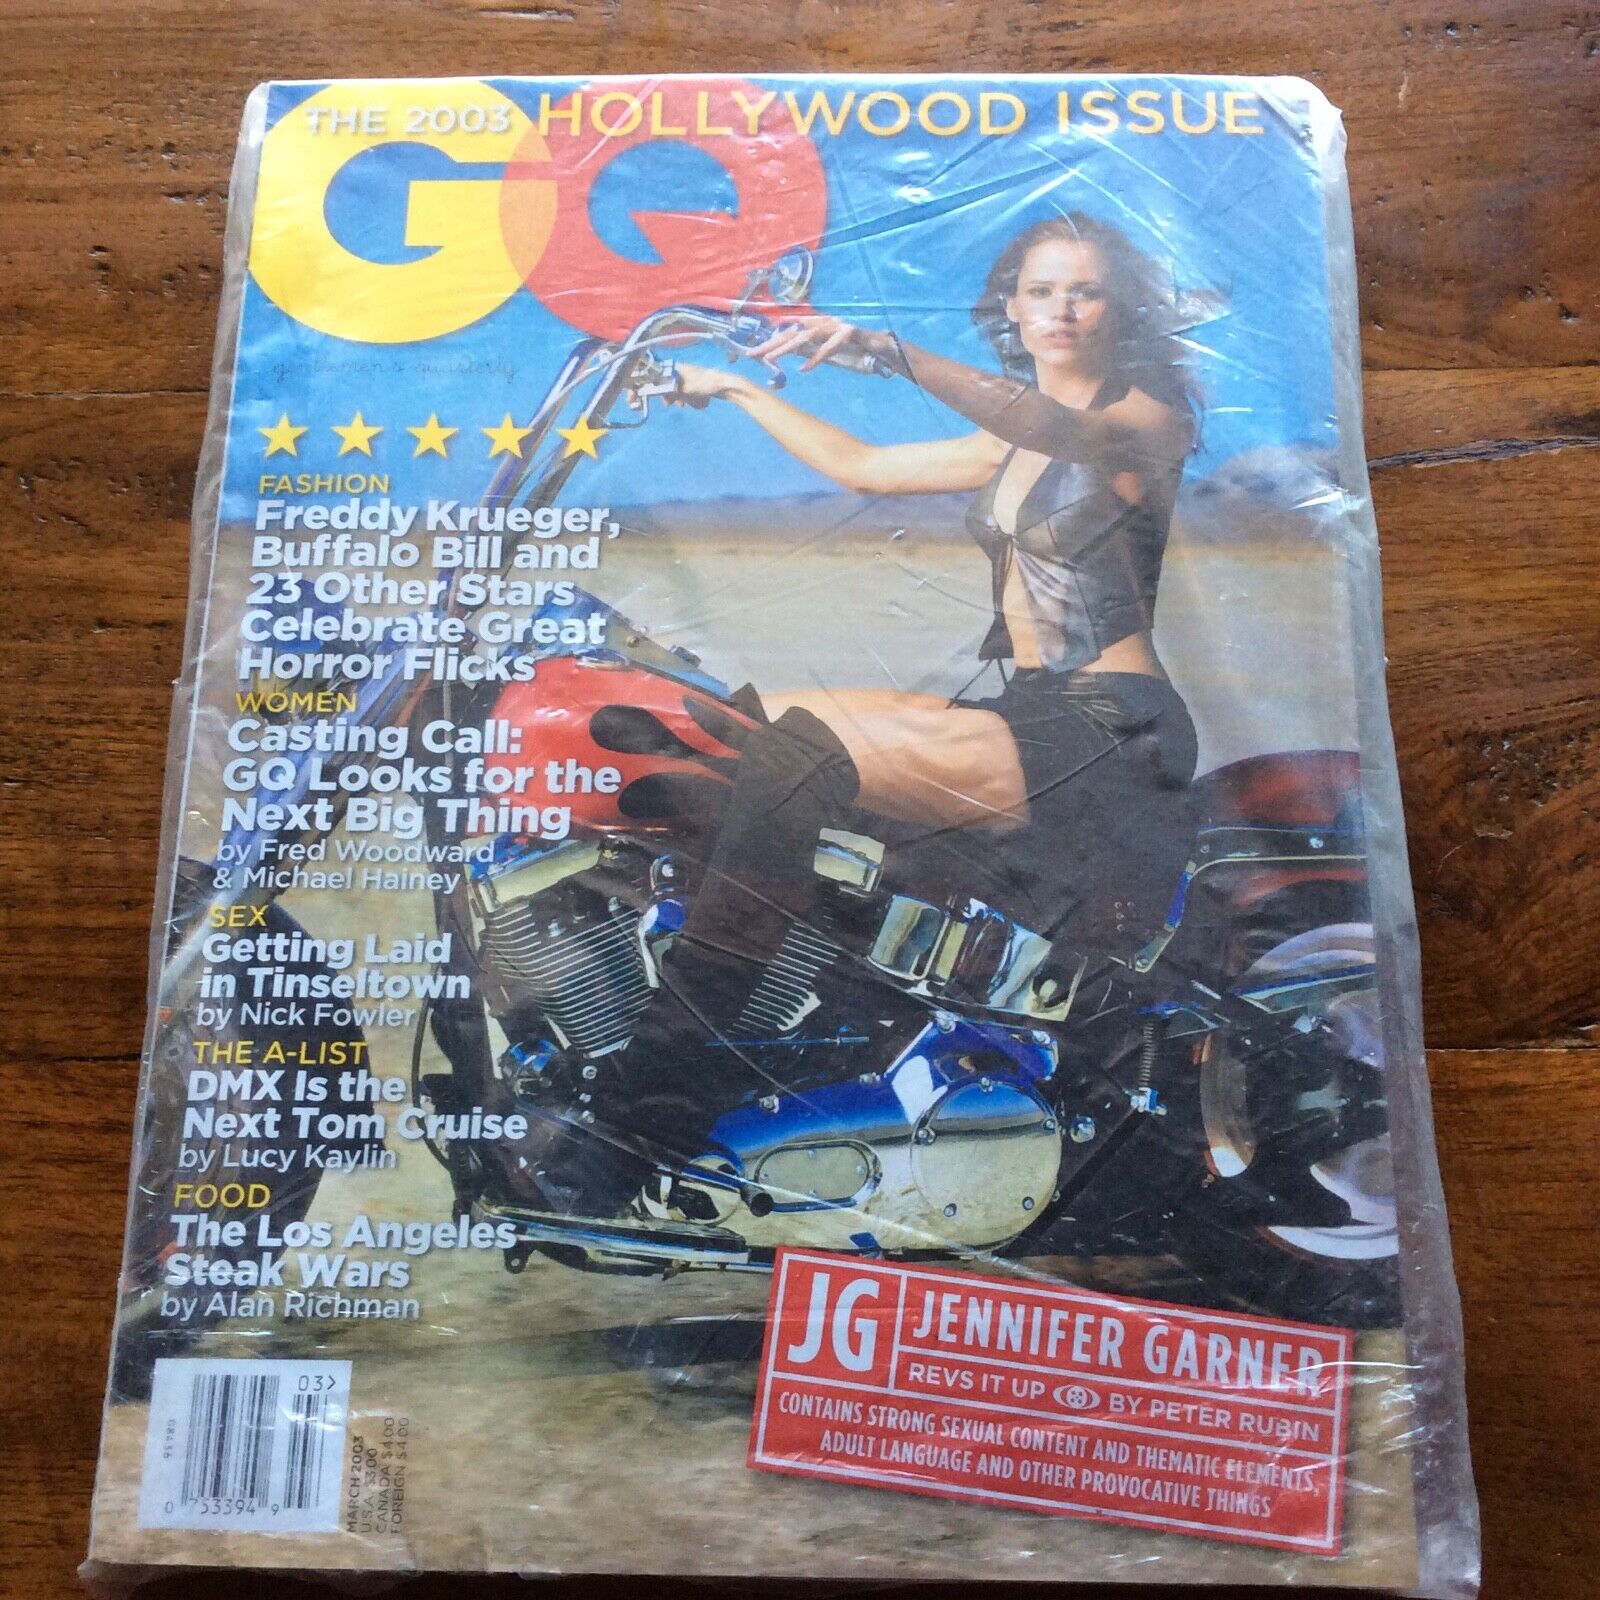 GQ Jennifer Garner Cover The 2003 Hollywood Issue (March 2003) eBay picture